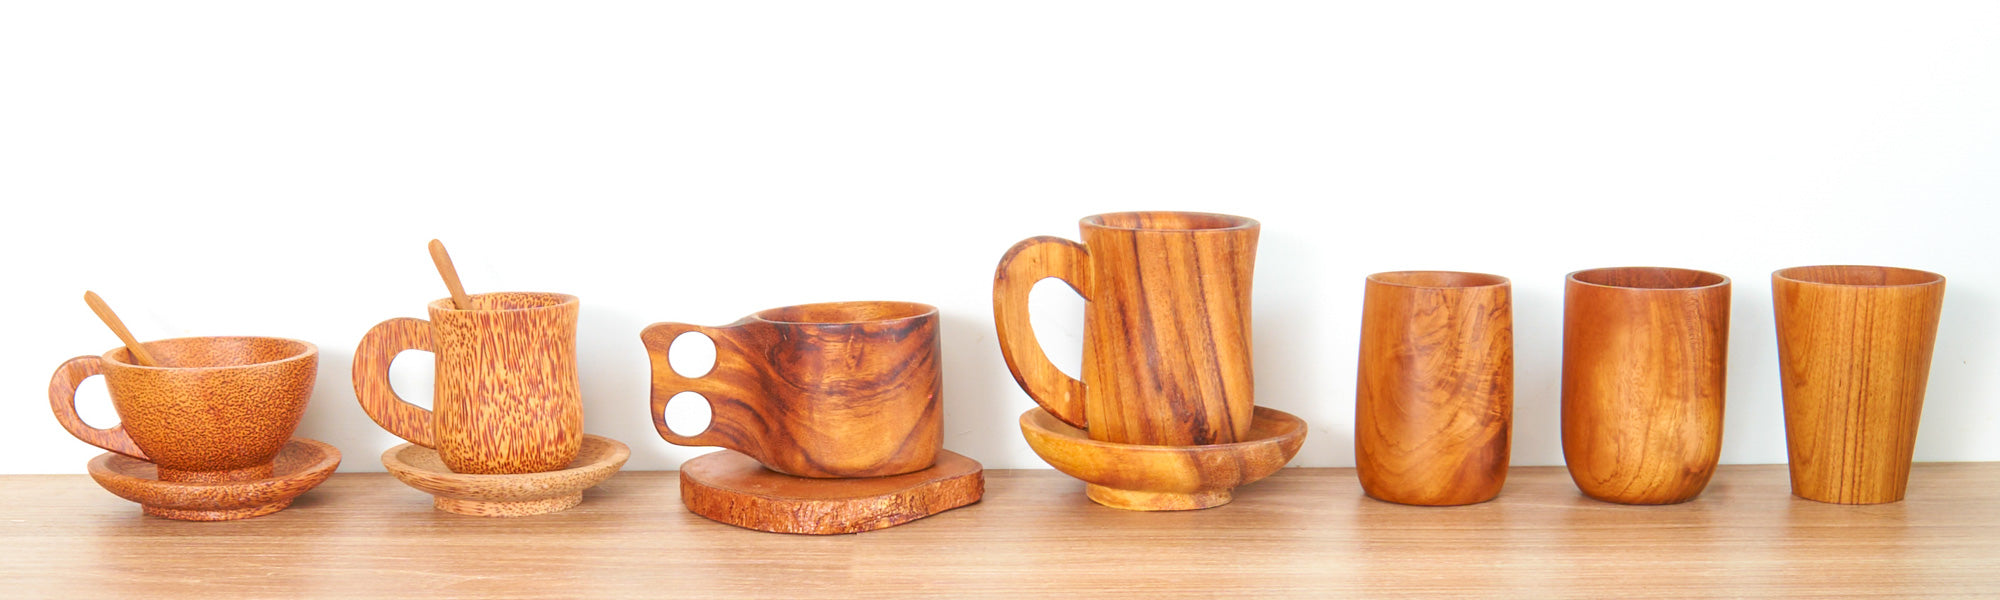 Wooden Tea Cup Sets  Japan-Inspired Luxury - Rainforest Bowls